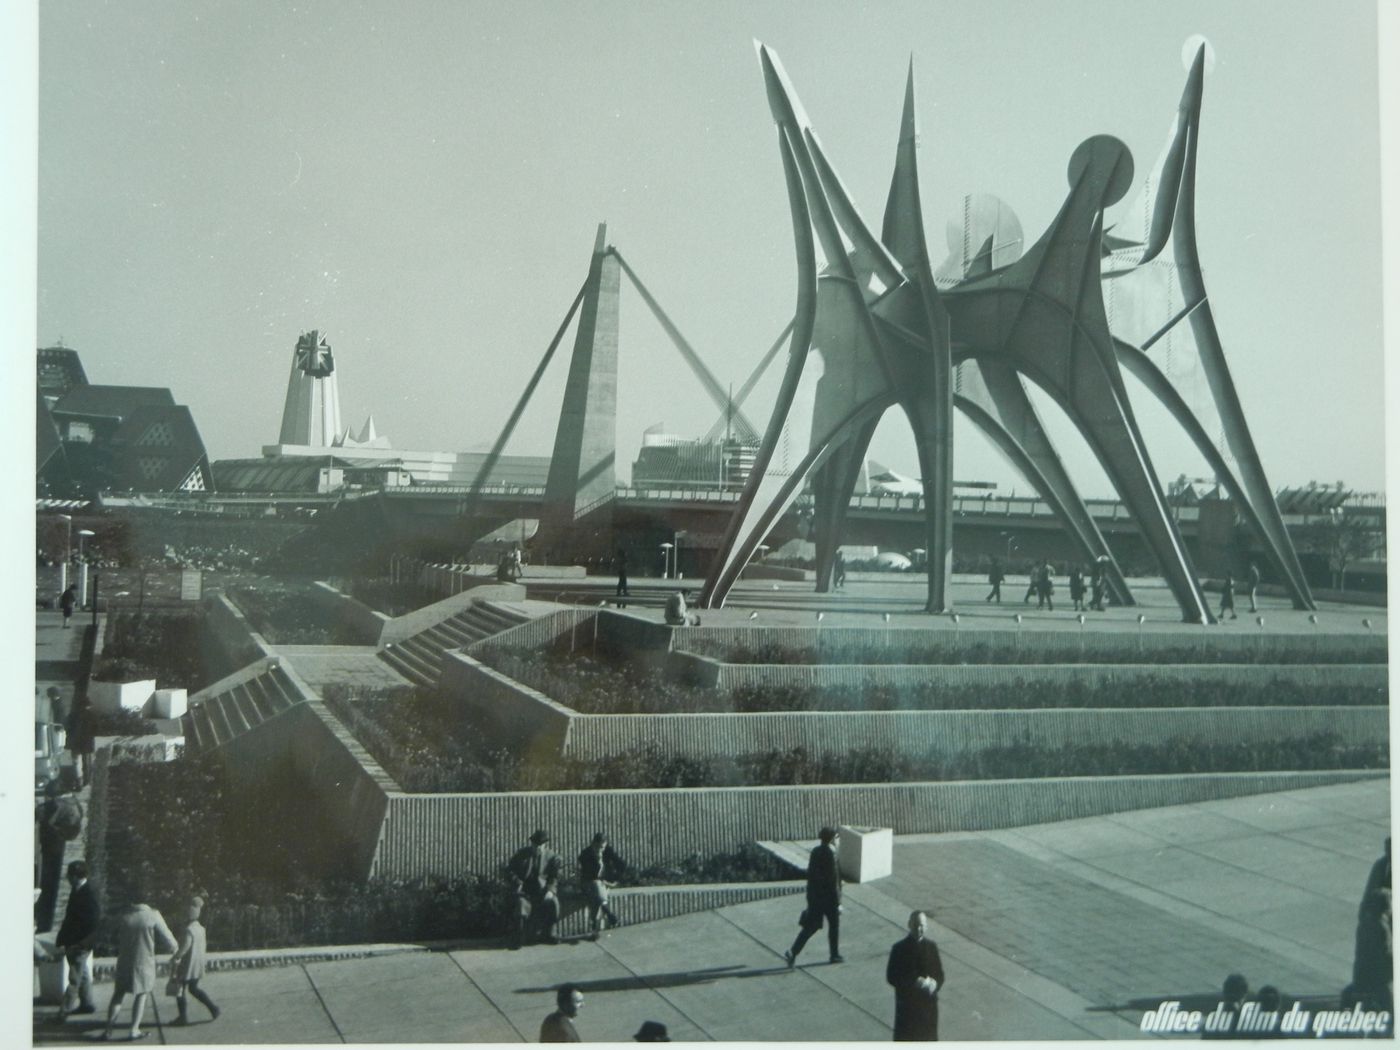 View of the sculpture 'Man, Three Disks' by Alexander Calder with Concordia Bridge and the Pavilions of Great Britain and France in background, Expo 67, Montréal, Québec